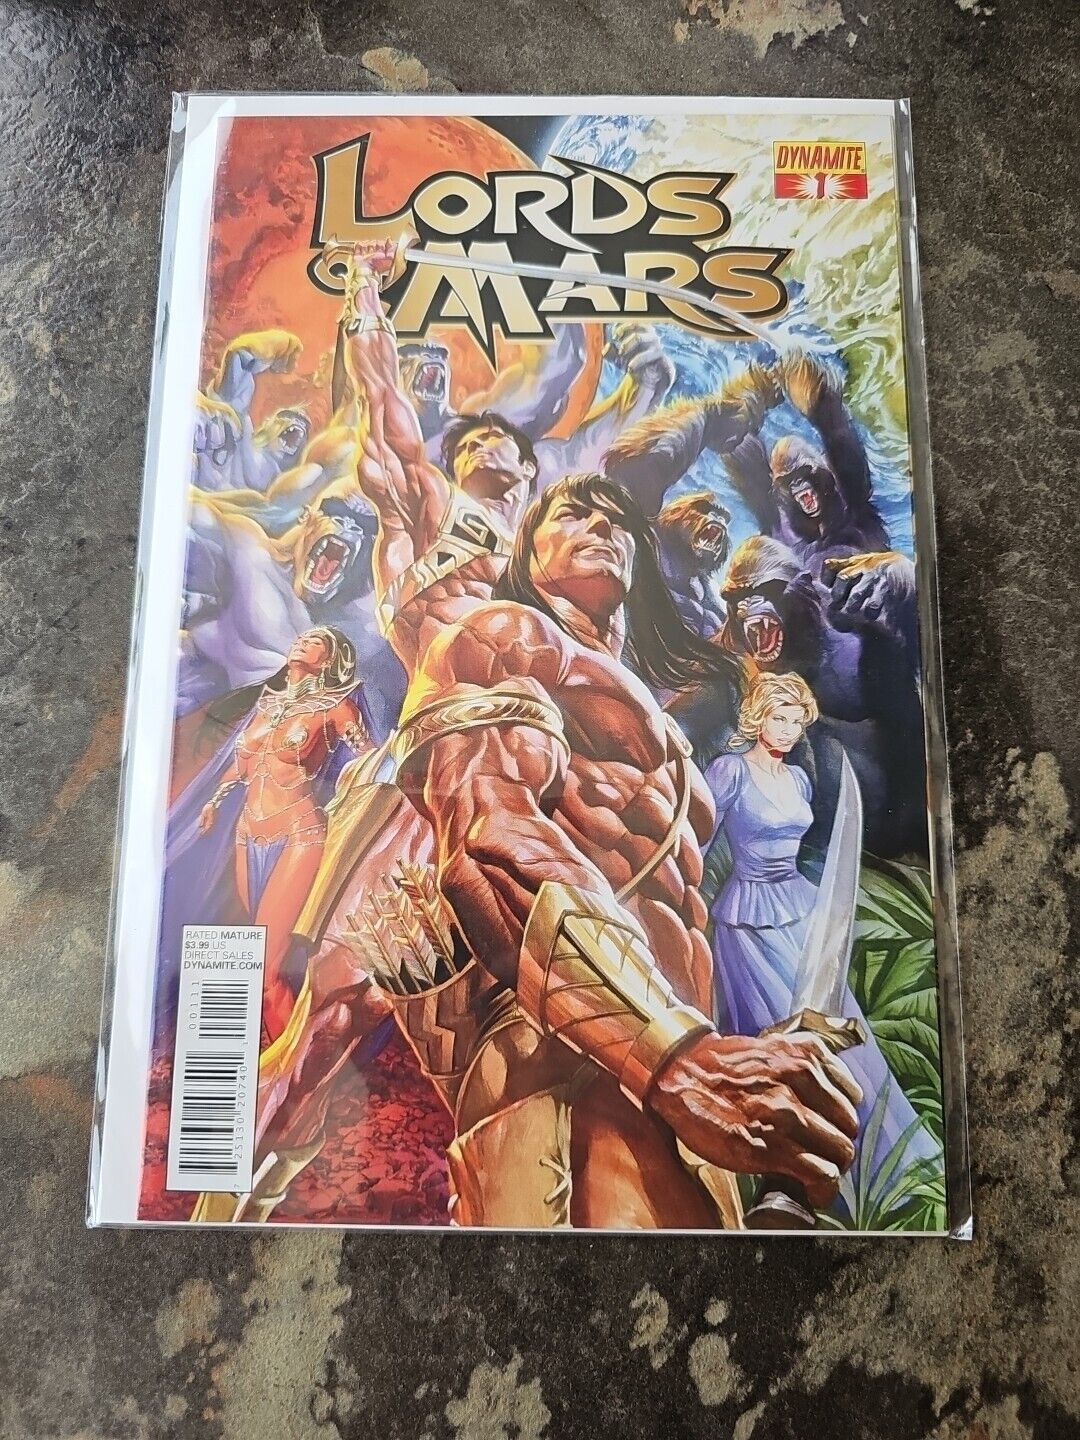 LORDS OF MARS #1 FIRST PRINTING 2013 DYNAMITE RATED MATURE COMIC BOOK